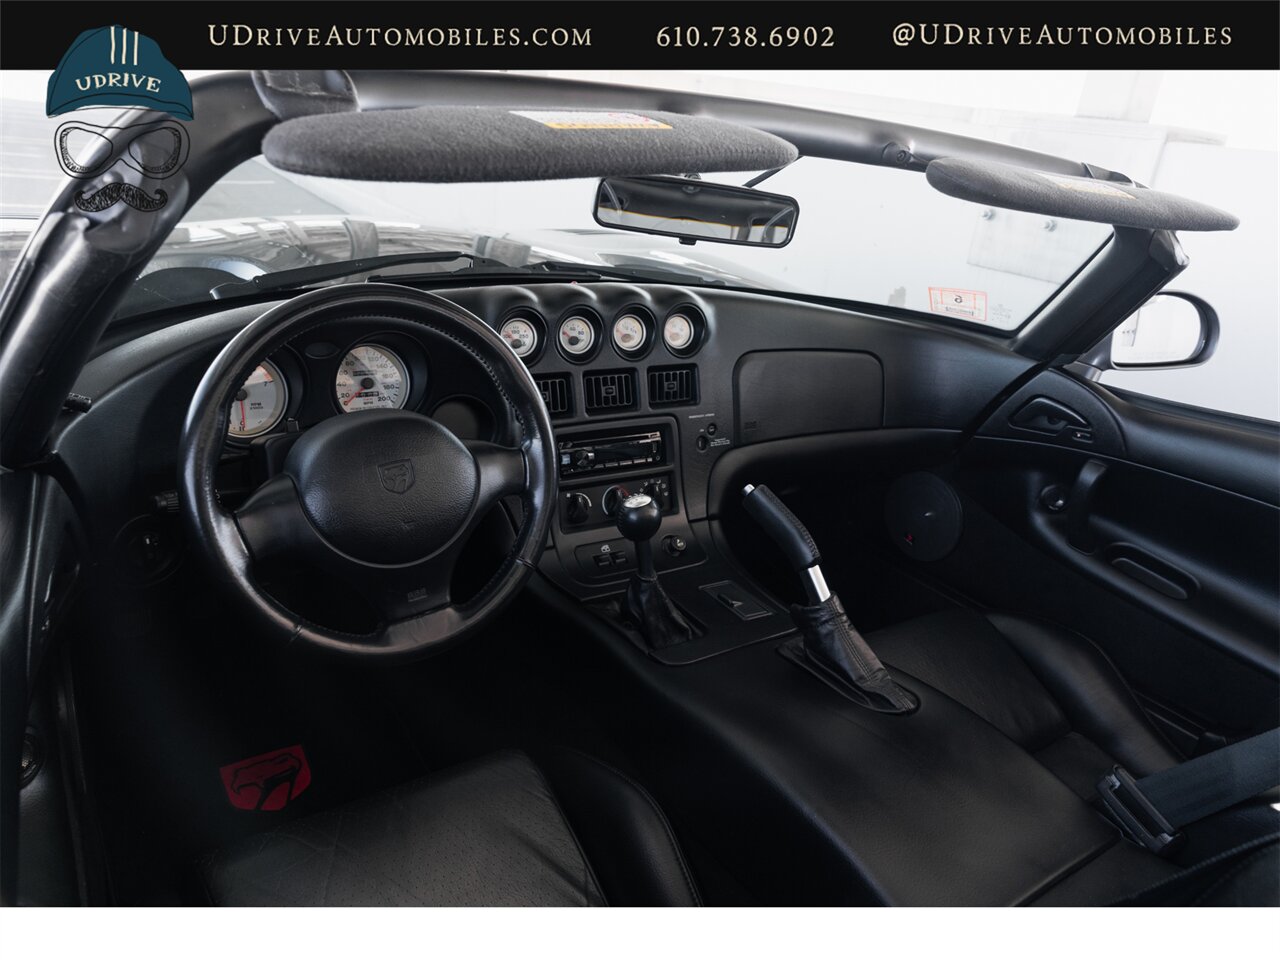 2000 Dodge Viper RT/10 Roadster  20k Miles - Photo 5 - West Chester, PA 19382